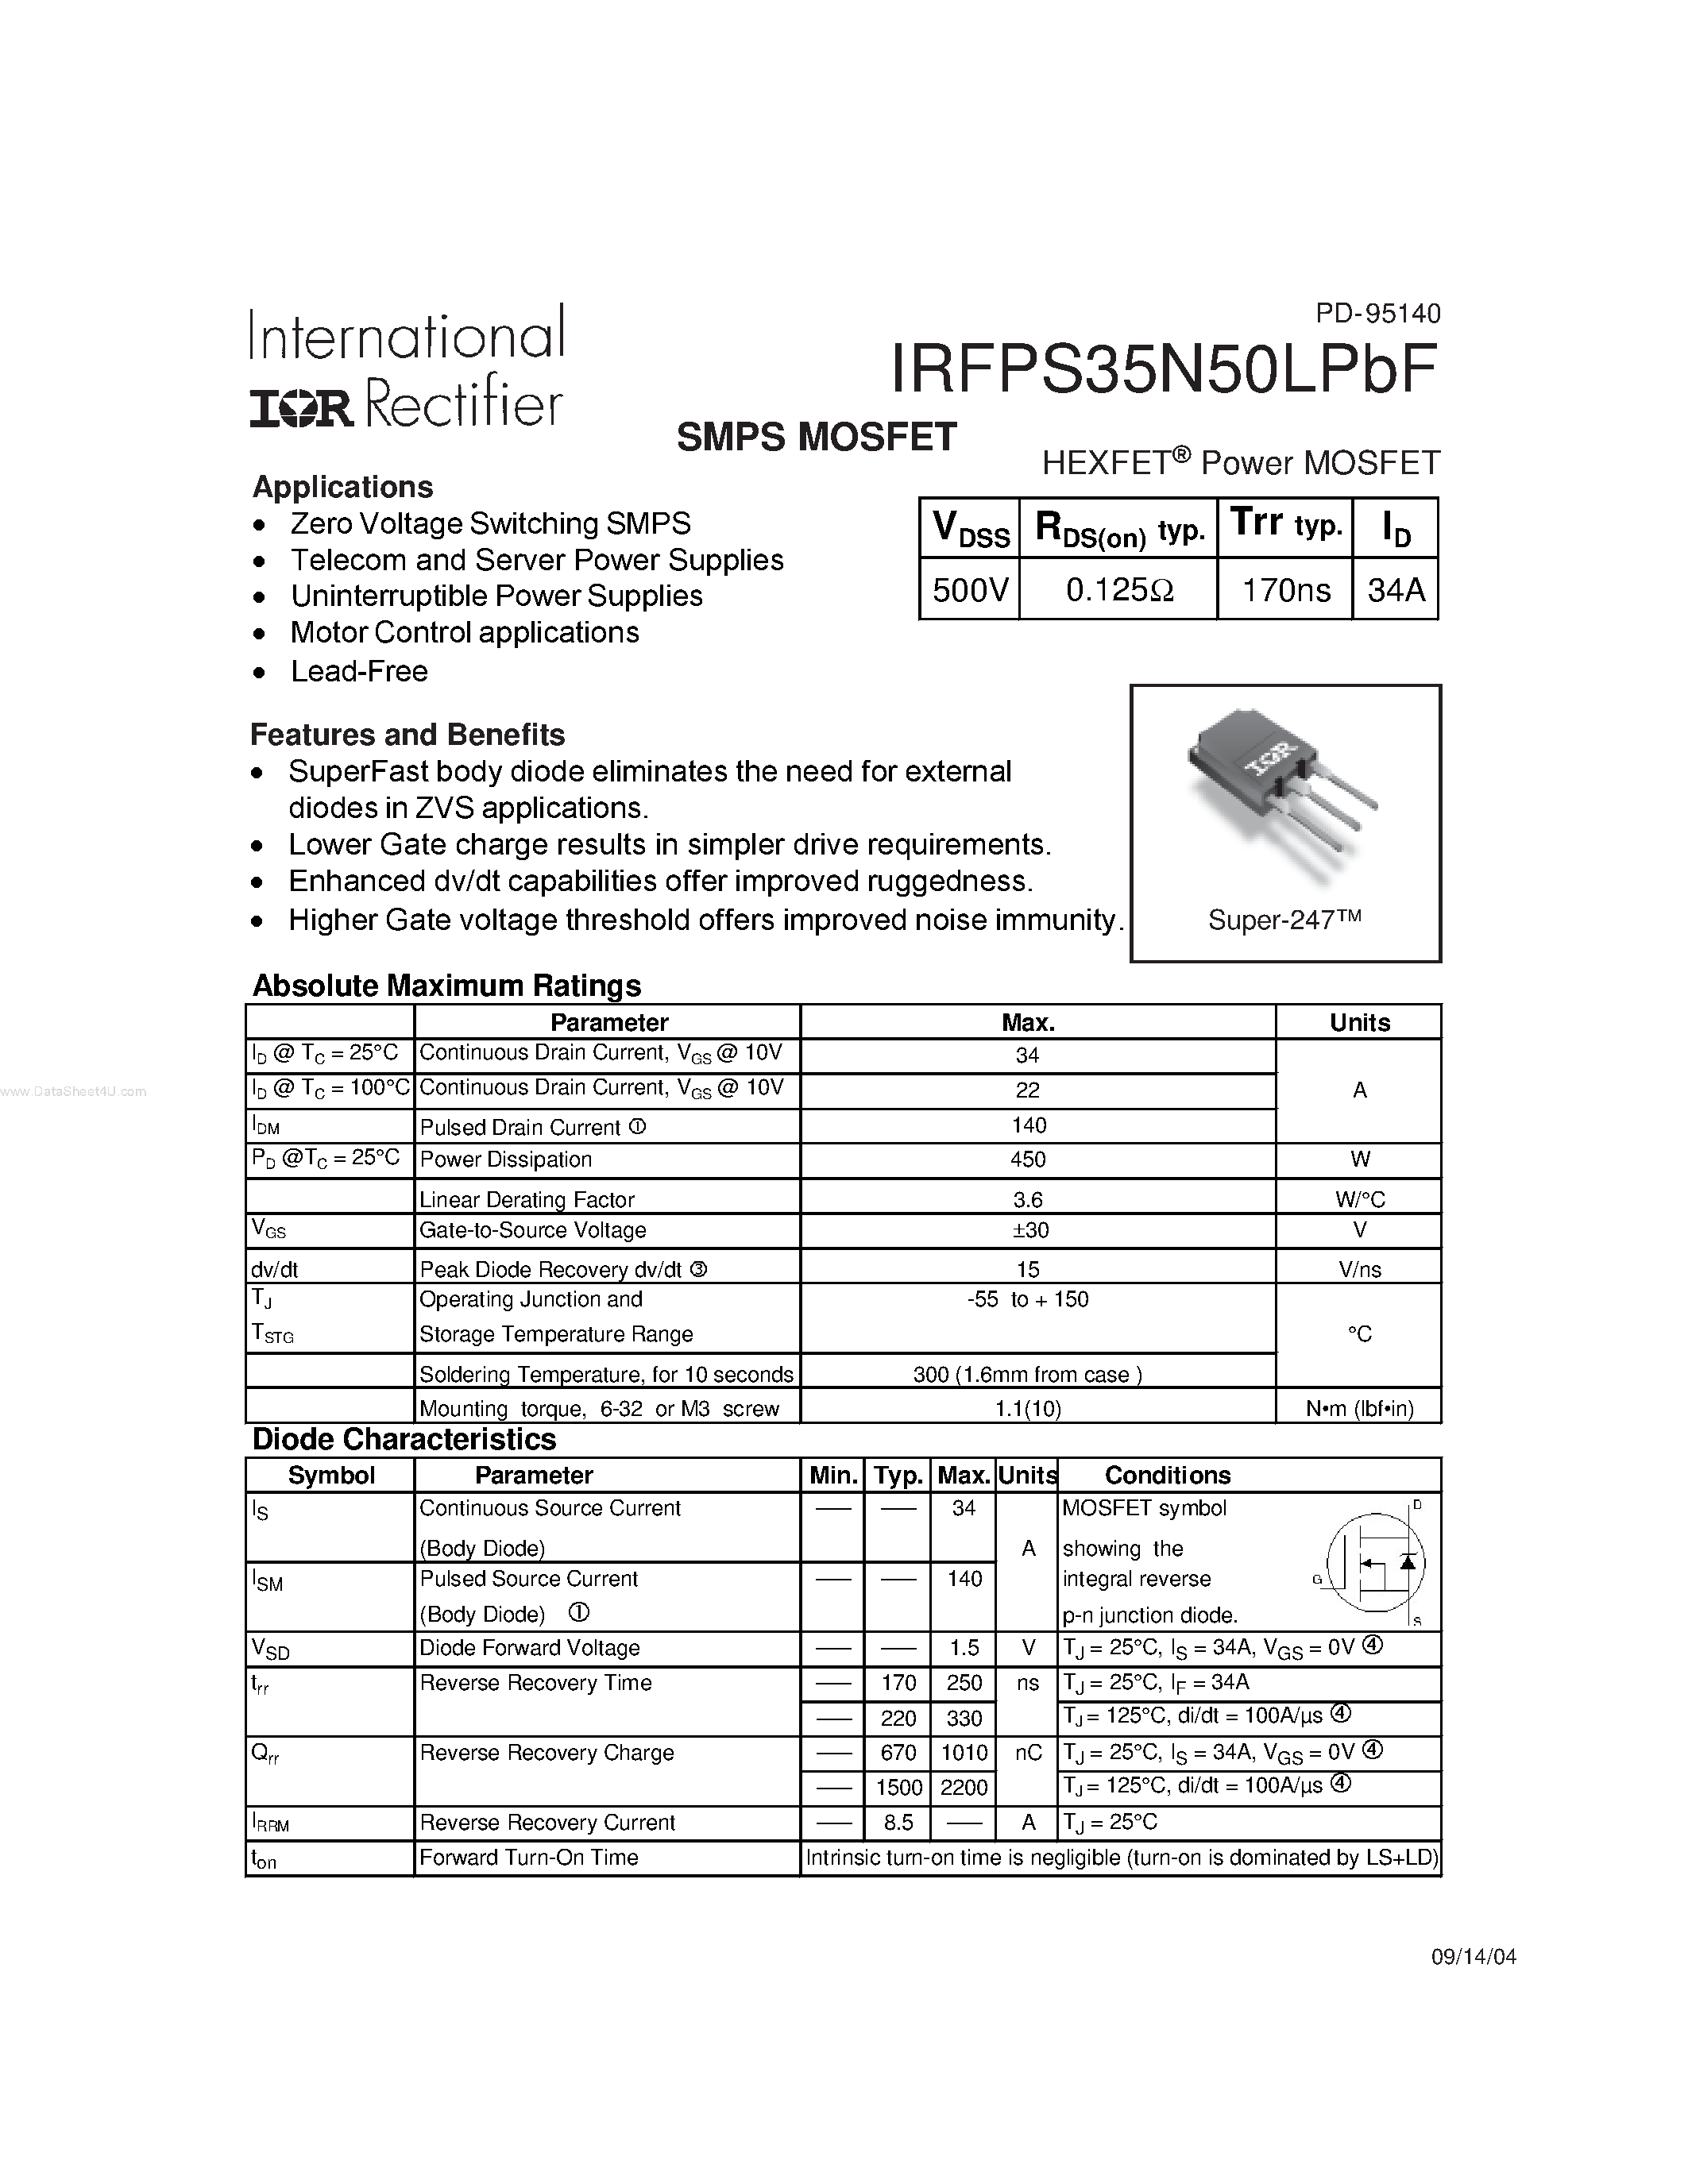 Datasheet IRFPS35N50LPBF - SMPS MOSFET page 1